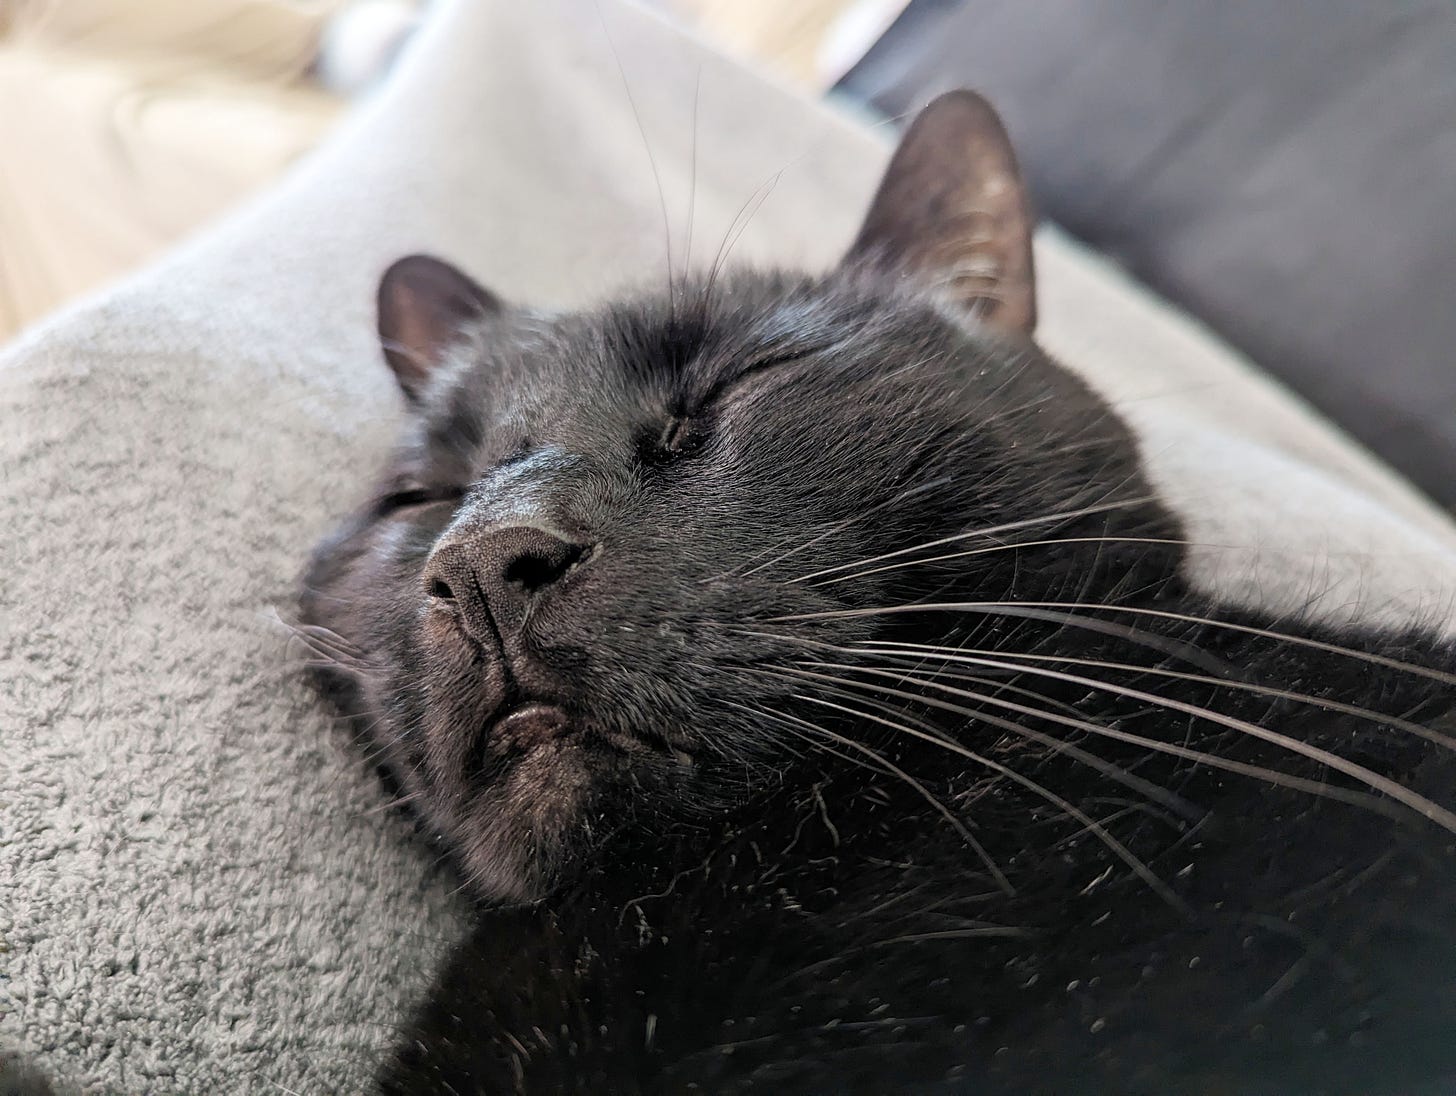 A black cat sleeps on a gray blanket. We see his face from a low angle.